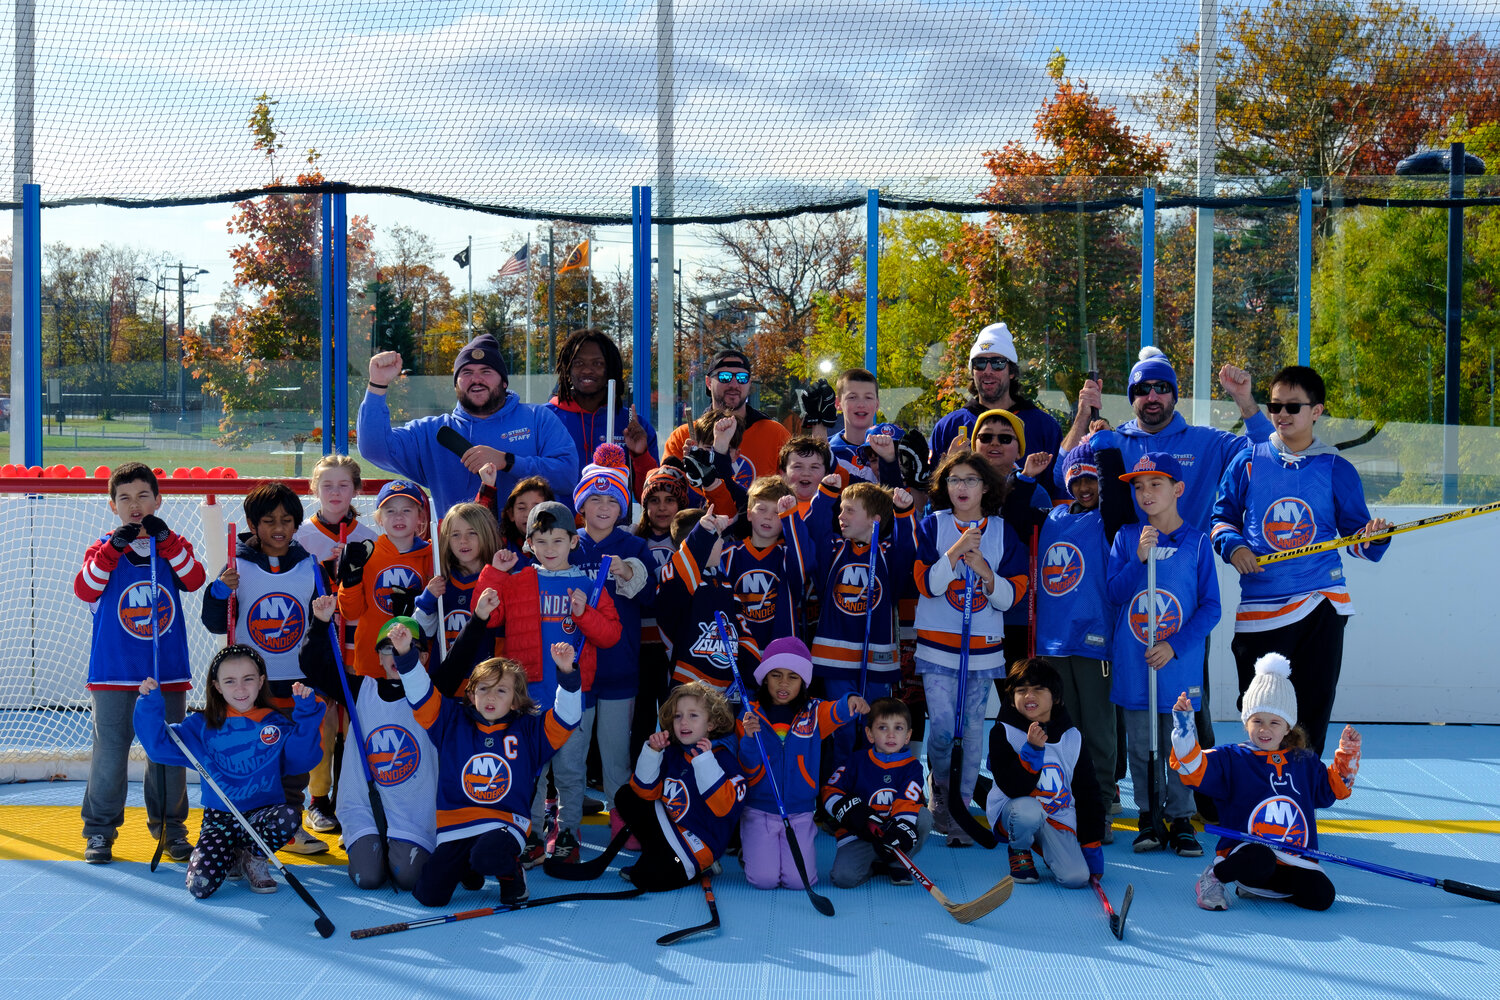 The New York Islanders held a free street hockey clinic on Sunday and the Northwell Health Ice Center, located on Merrick Avenue in Eisenhower Park.